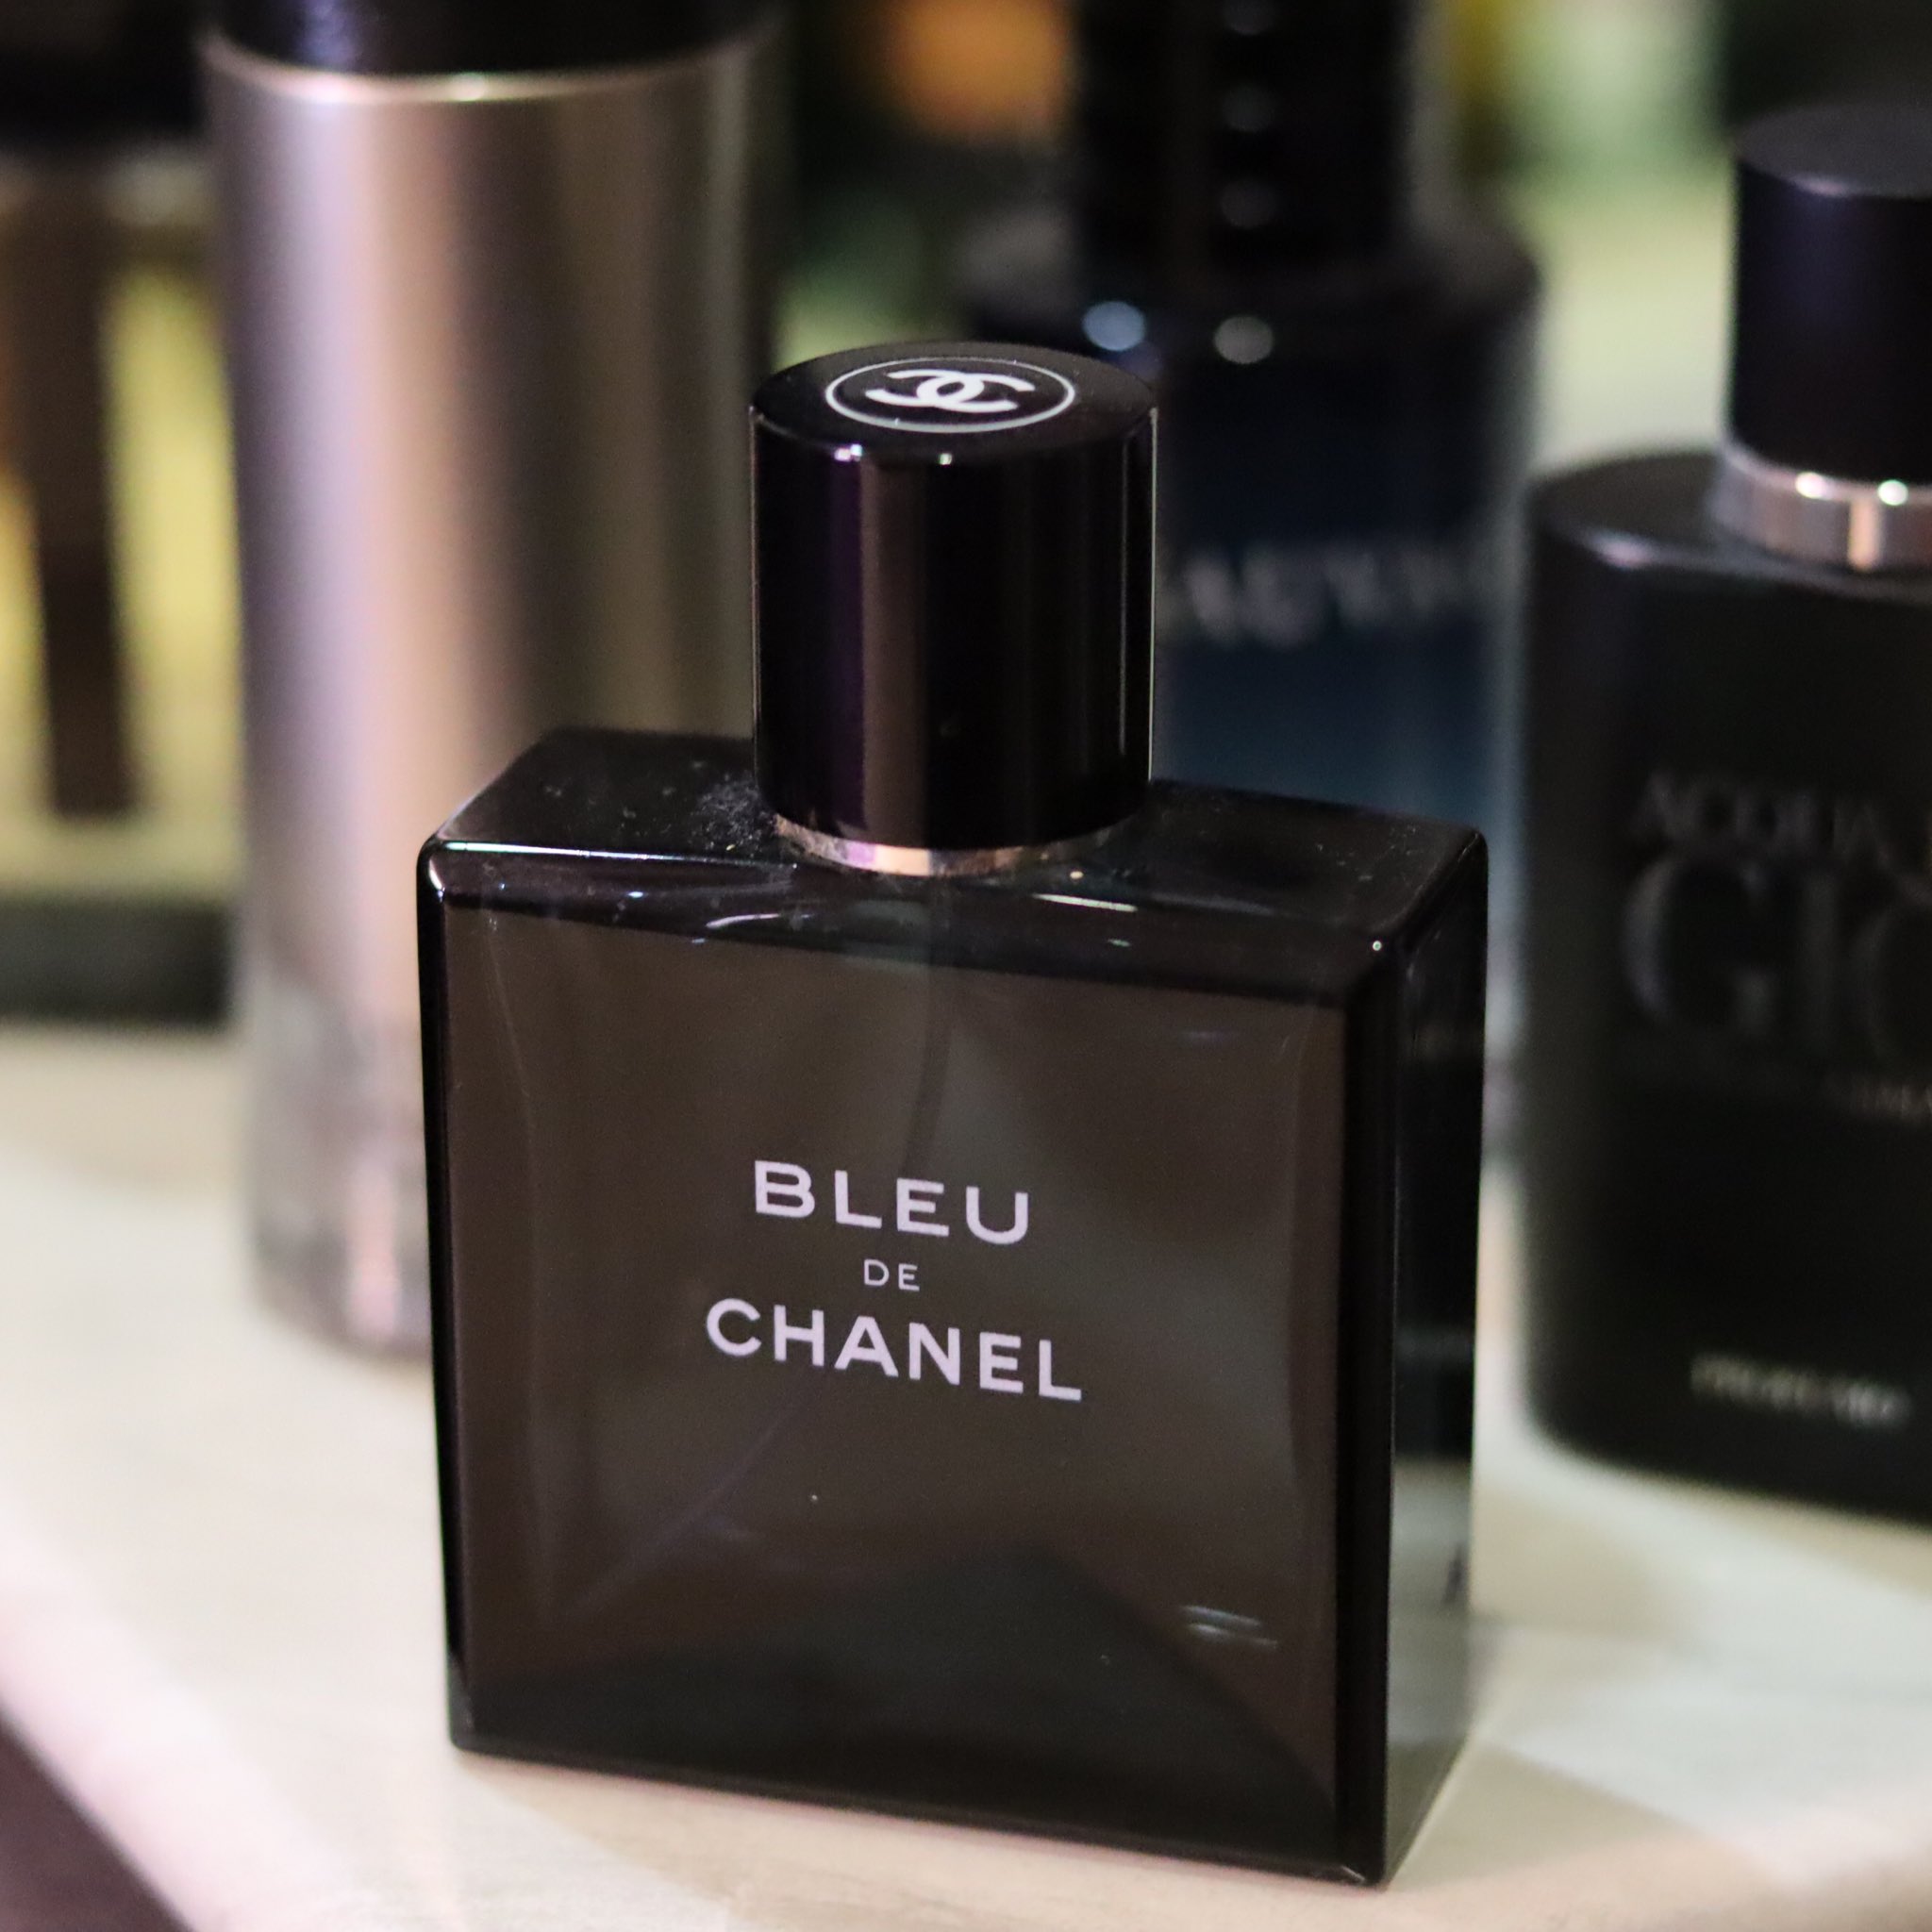 FARITH MORNIAS on X: 5. BLEU DE CHANEL EDT KING OF BLUE FRAGRANCE.  Anytime, anywhere, any occasion, mmg 10/10. Bau fresh zesty lemon &  grapefruit in the opening, with a powerful dominant